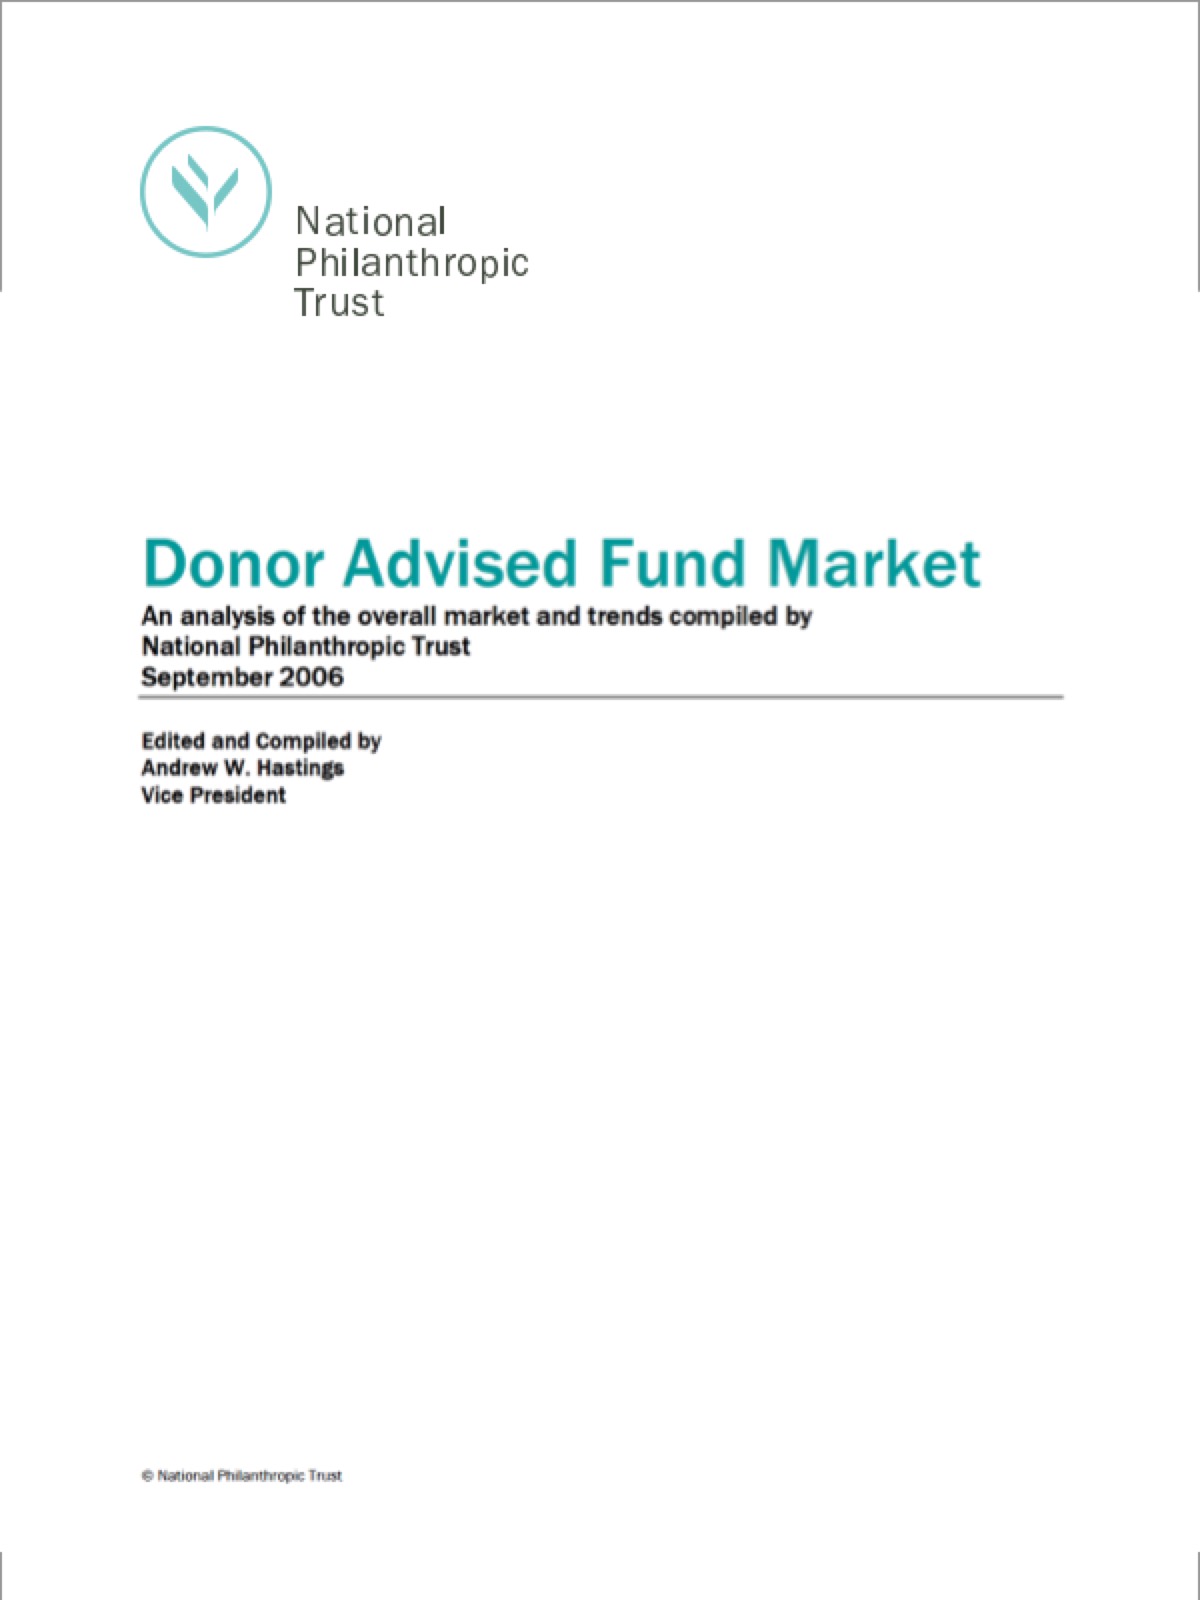 The front page of a 2006 publication titled “Donor-Advised Fund Market: An analysis of the overall market and trends compiled by National Philanthropic Trust,” featuring the current-day NPT logo in the upper left-hand corner.